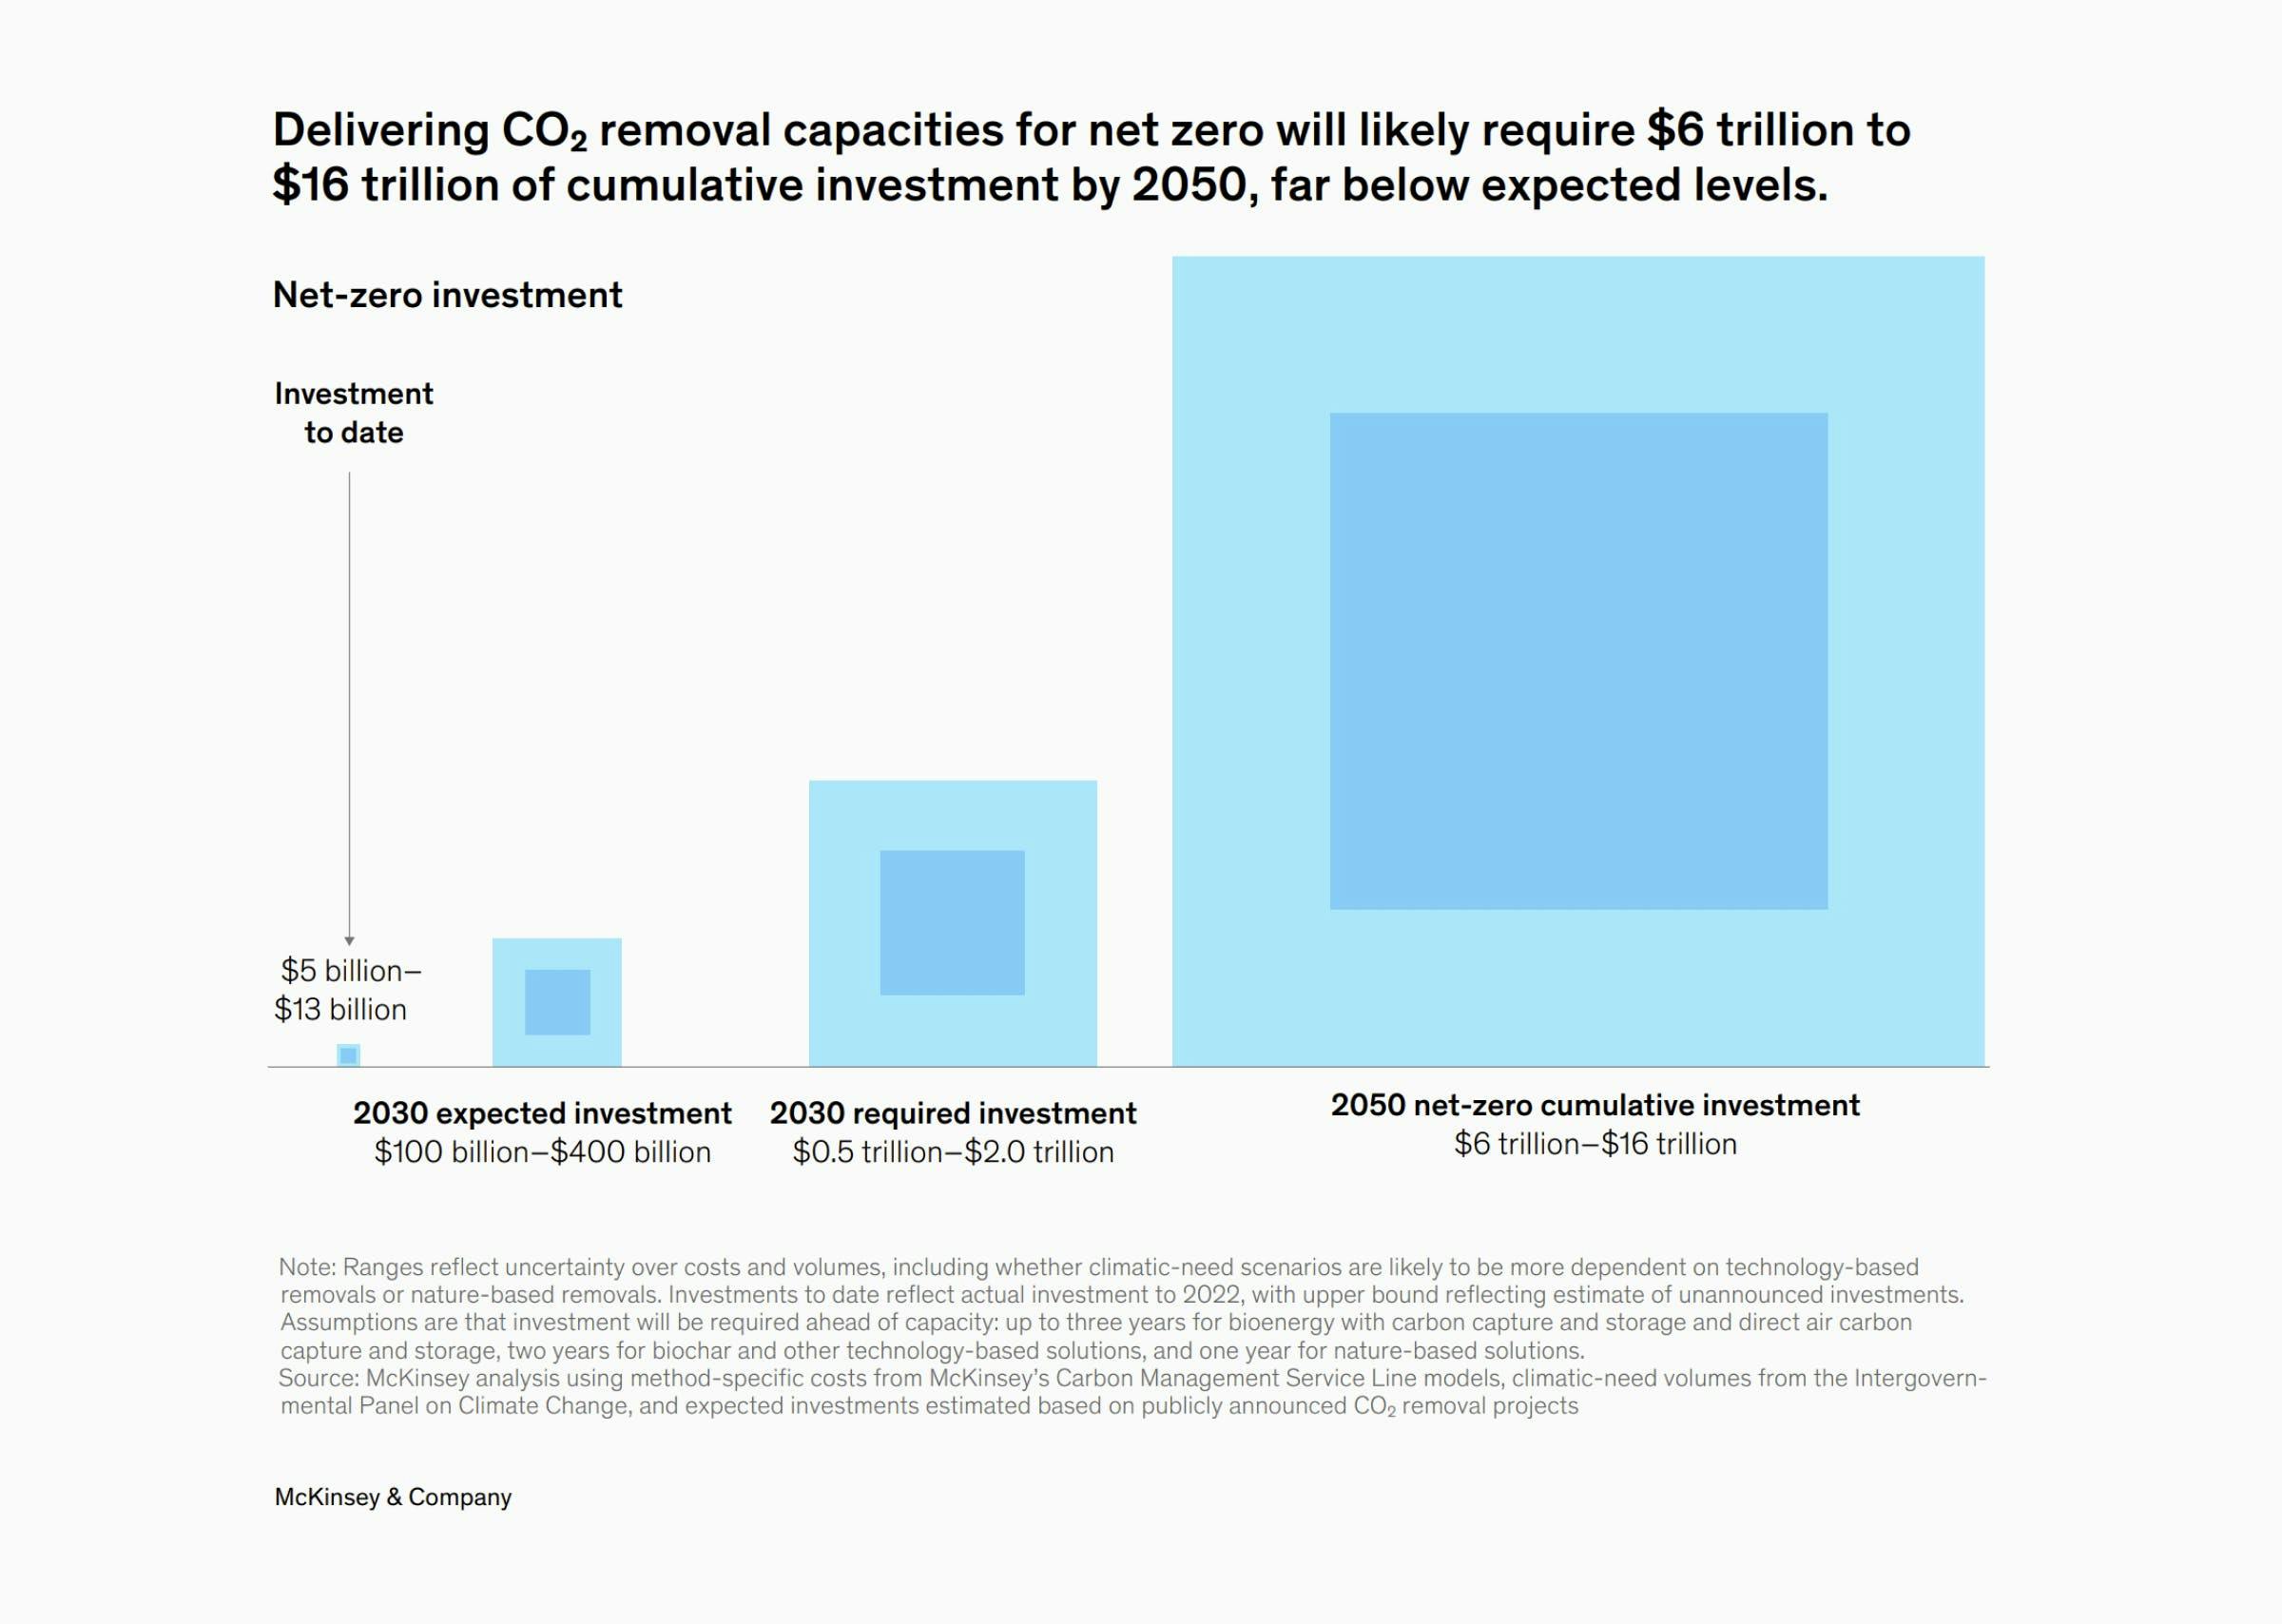 McKinsey carbon removal capacity needs to scale by 100 times this decade to meet net zero goals.